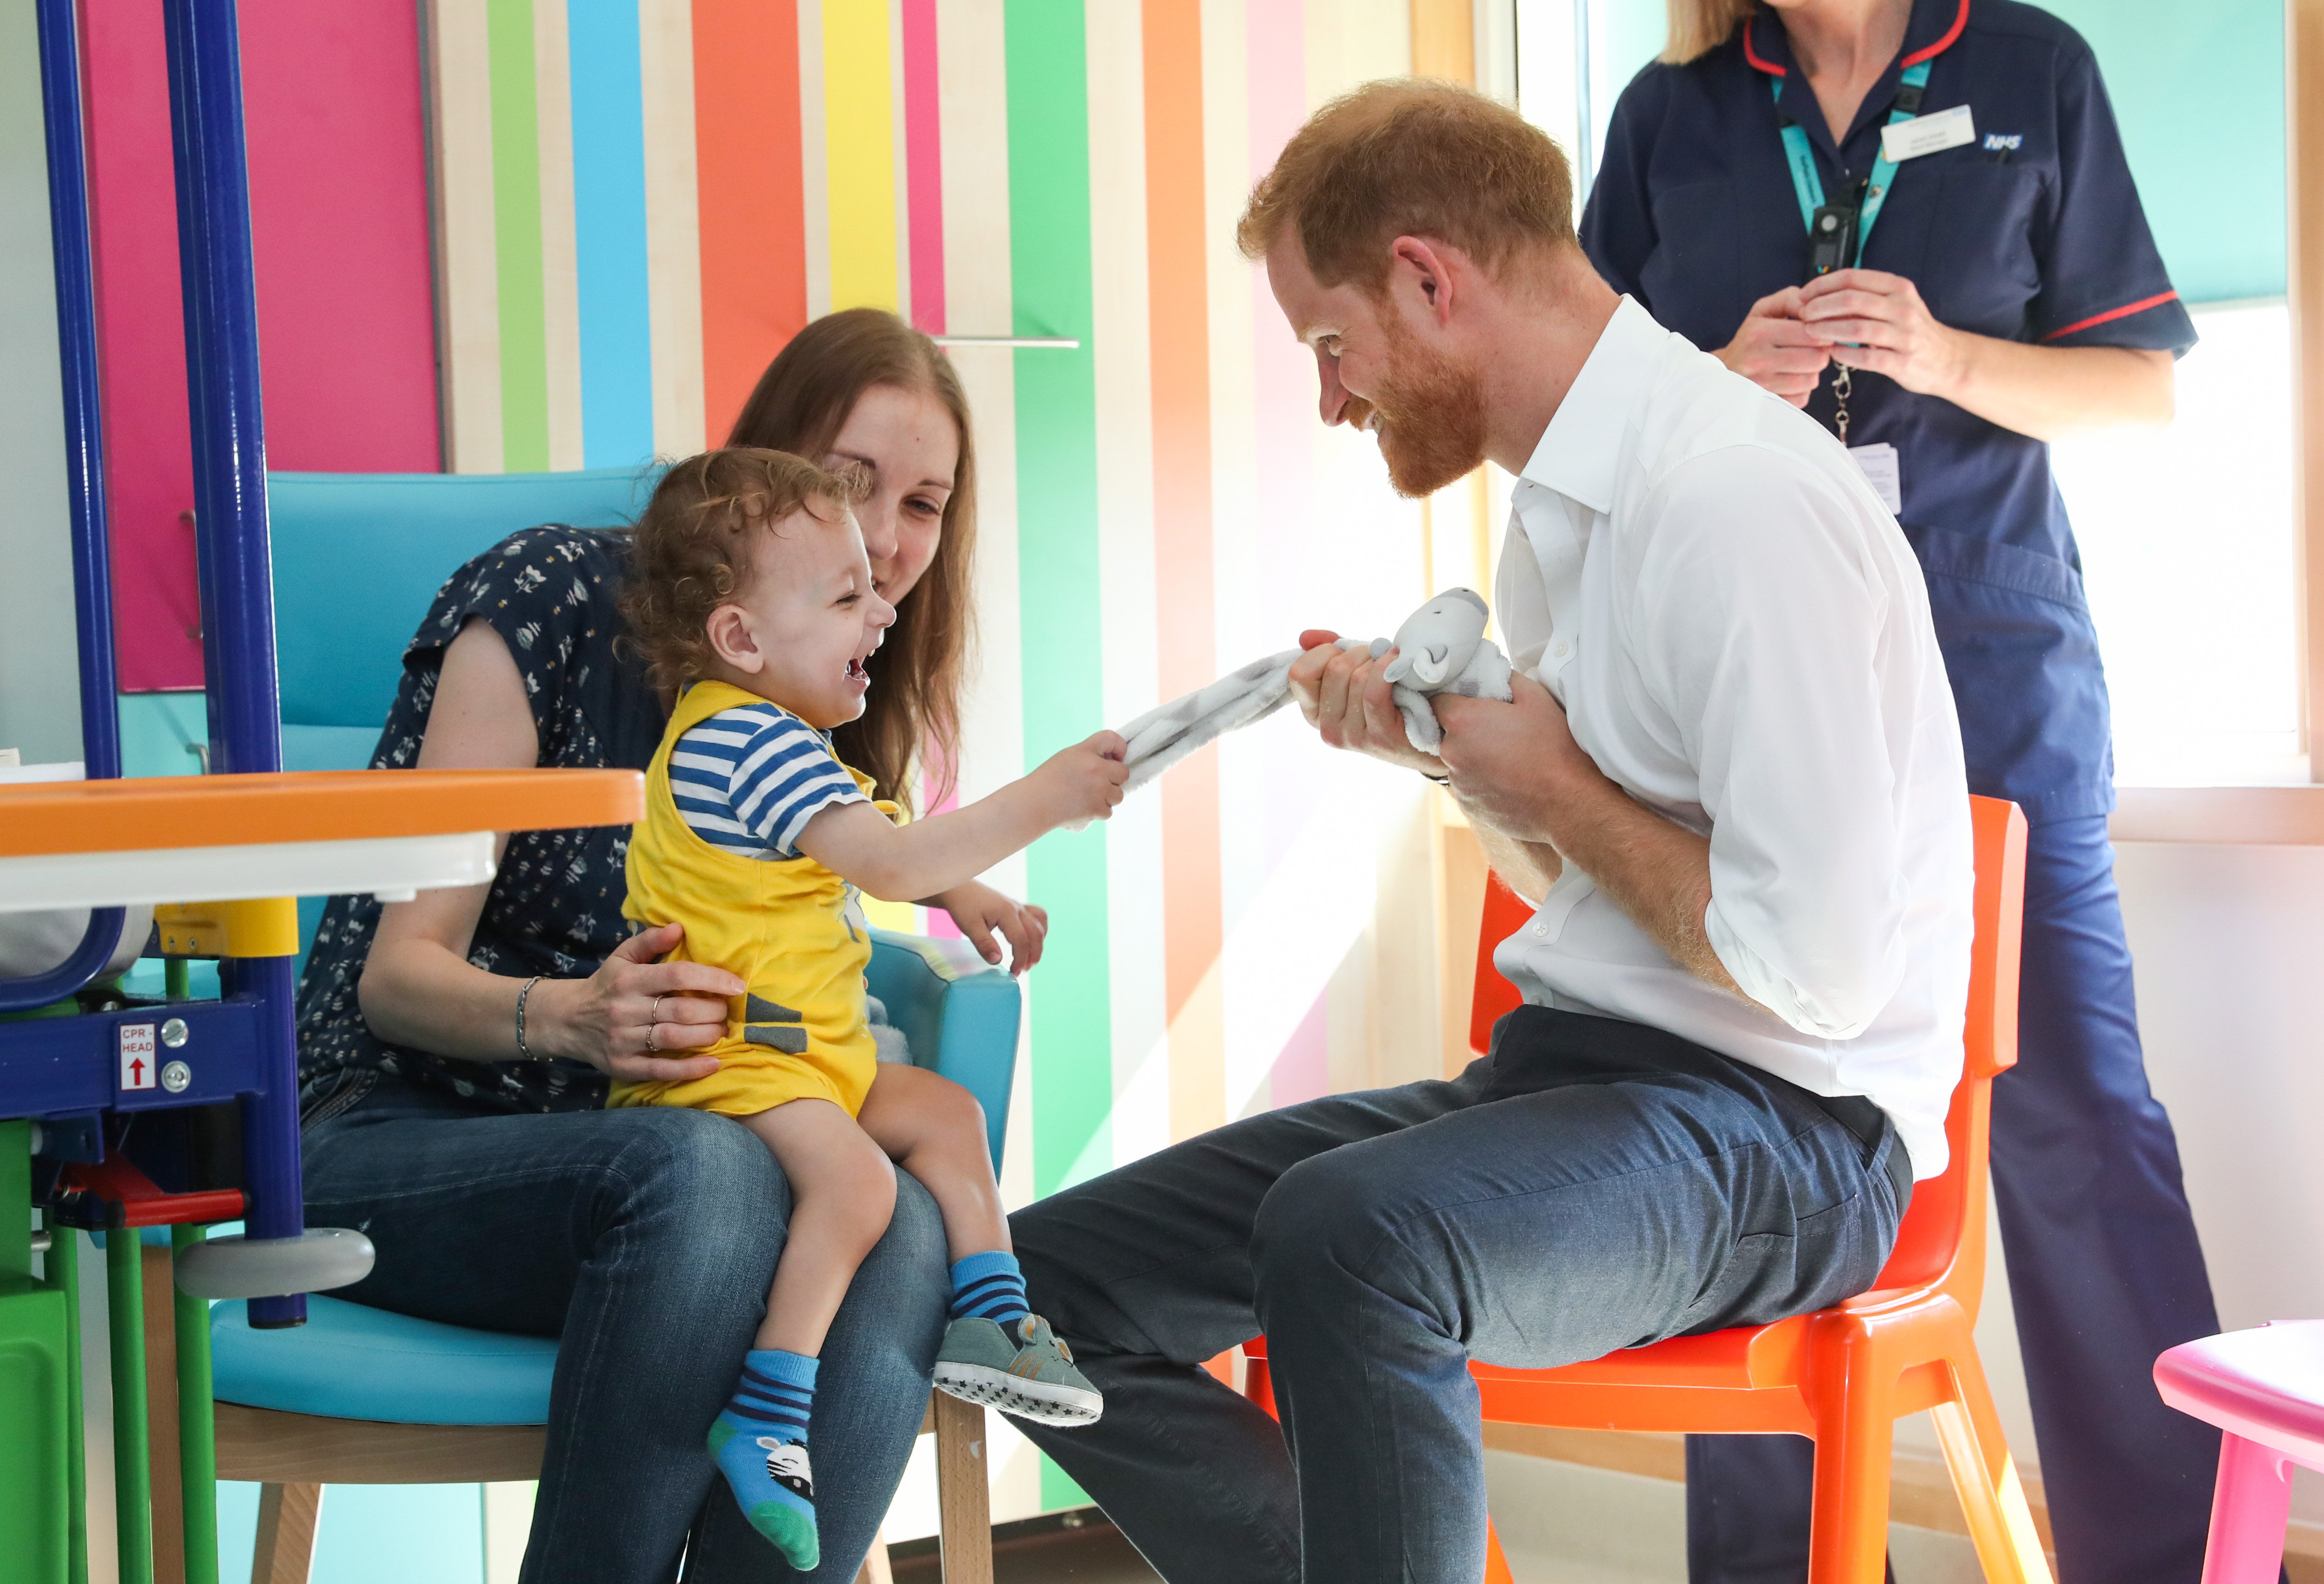 Prince Harry interacts with Noah Nicholson during a visit to Sheffield Children's Hospital on Thursday July 26, 2019 | Photo:Getty Images